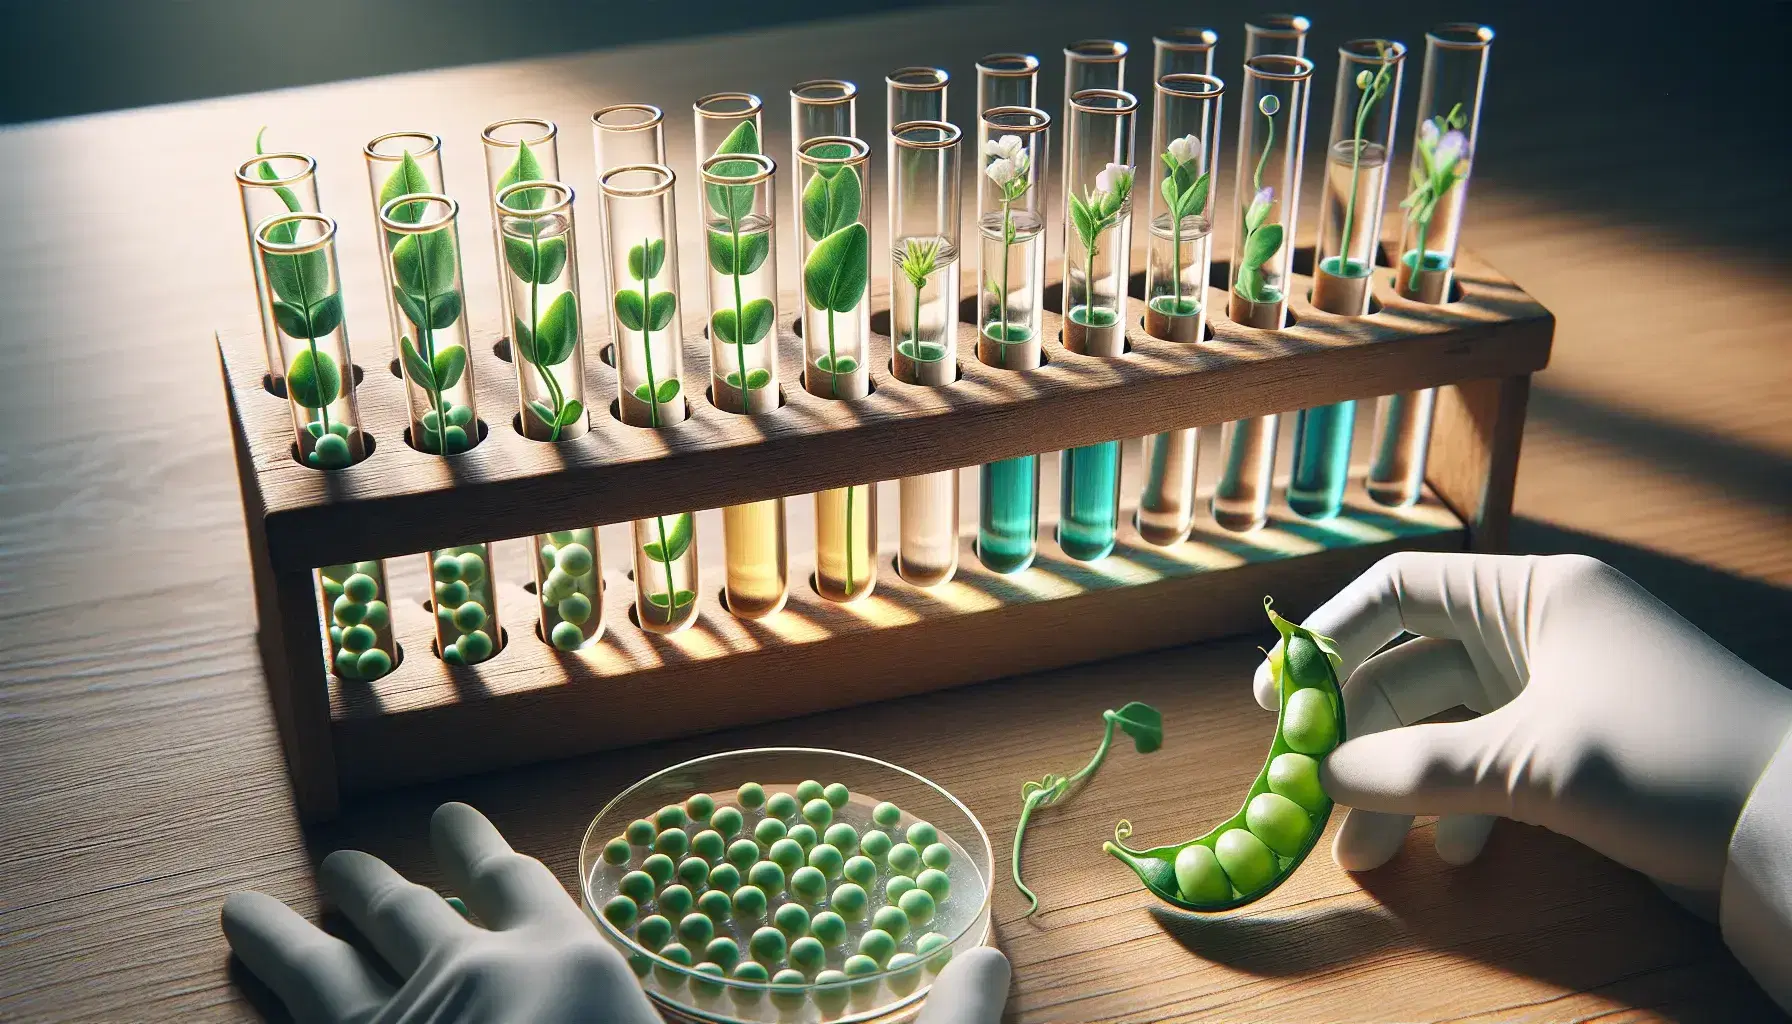 Close-up view of a wooden lab table with a rack of colorful liquids in test tubes and pea plants in a petri dish, with gloved hands placing a pea pod.